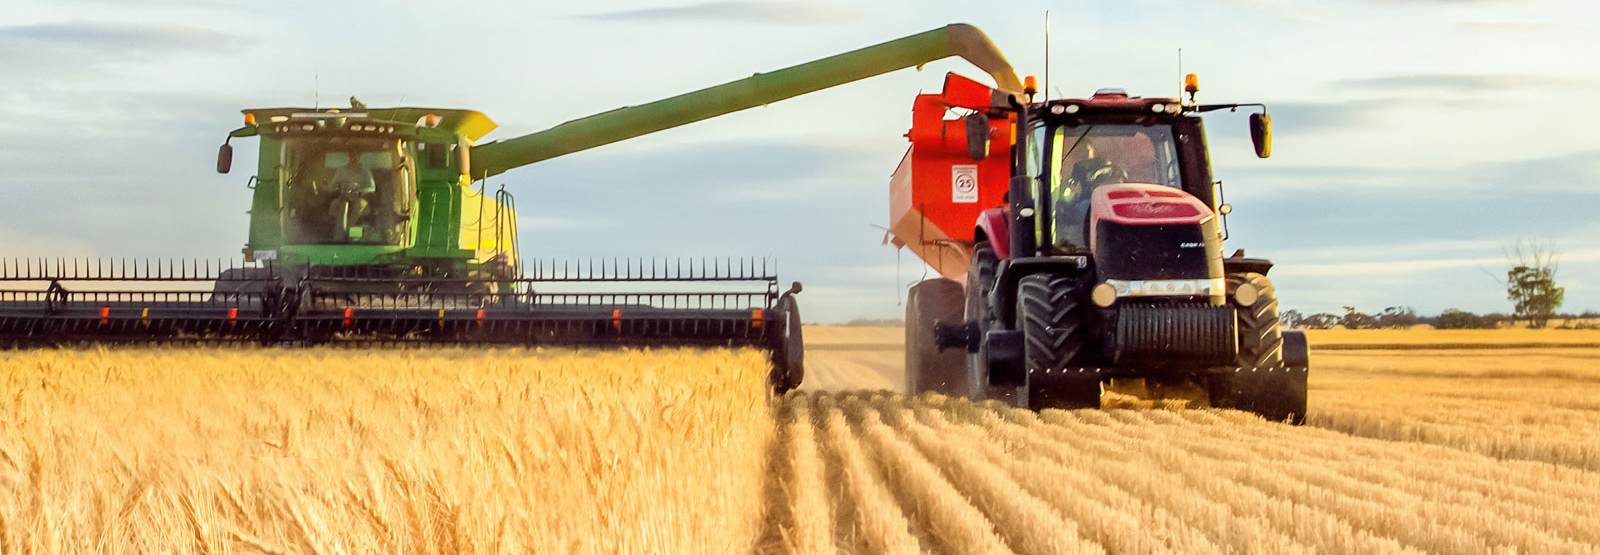 a tractor and combine harvesting wheat